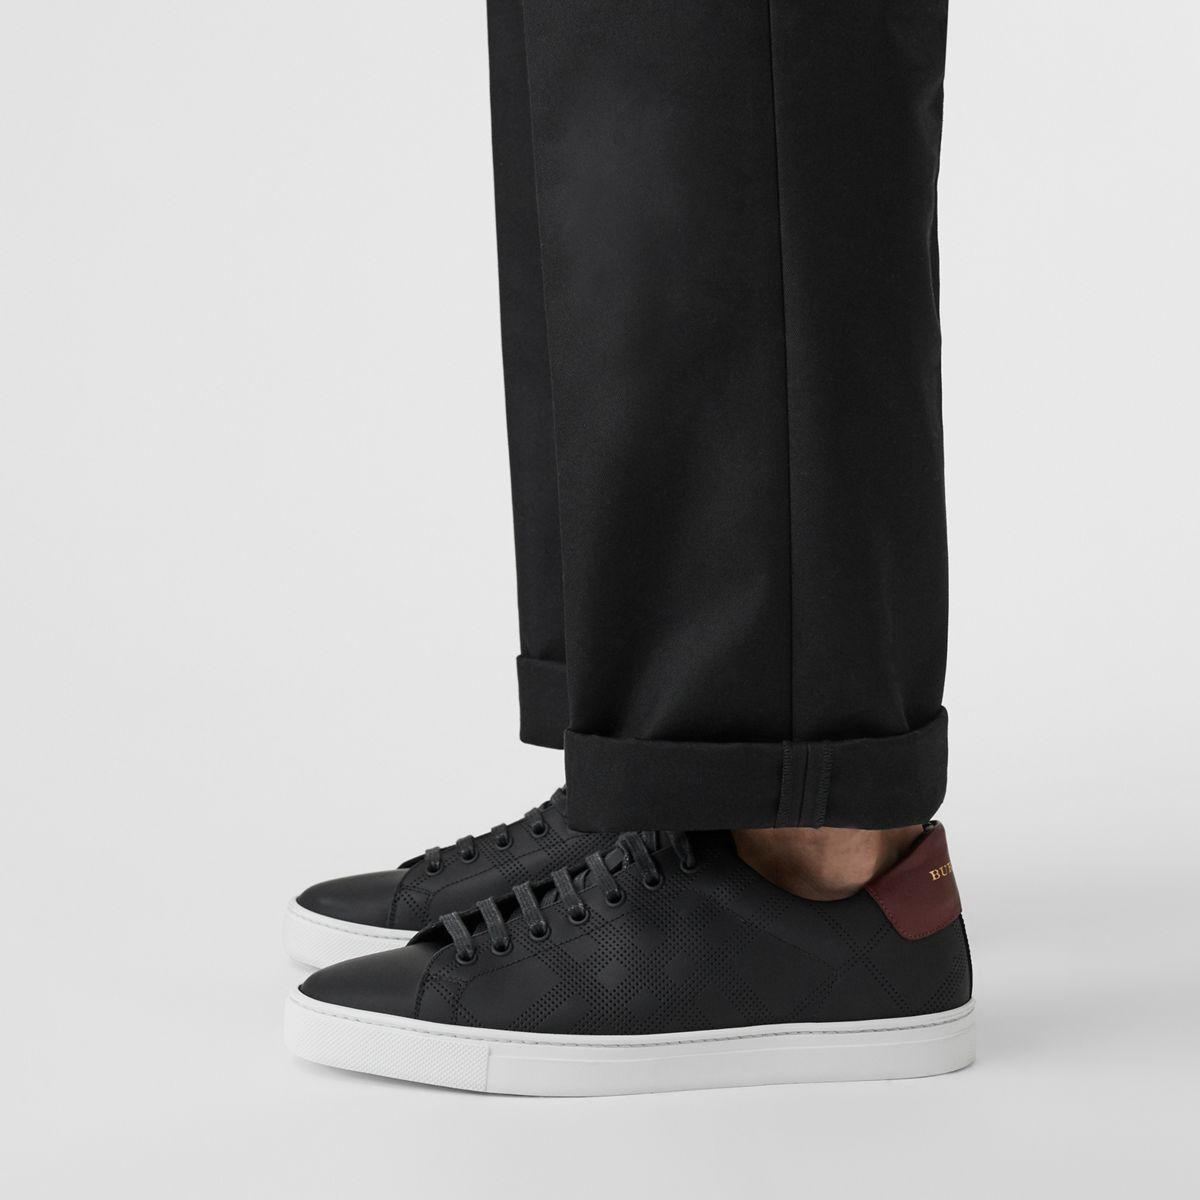 Perforated Leather Sneakers in Black for Men - Lyst